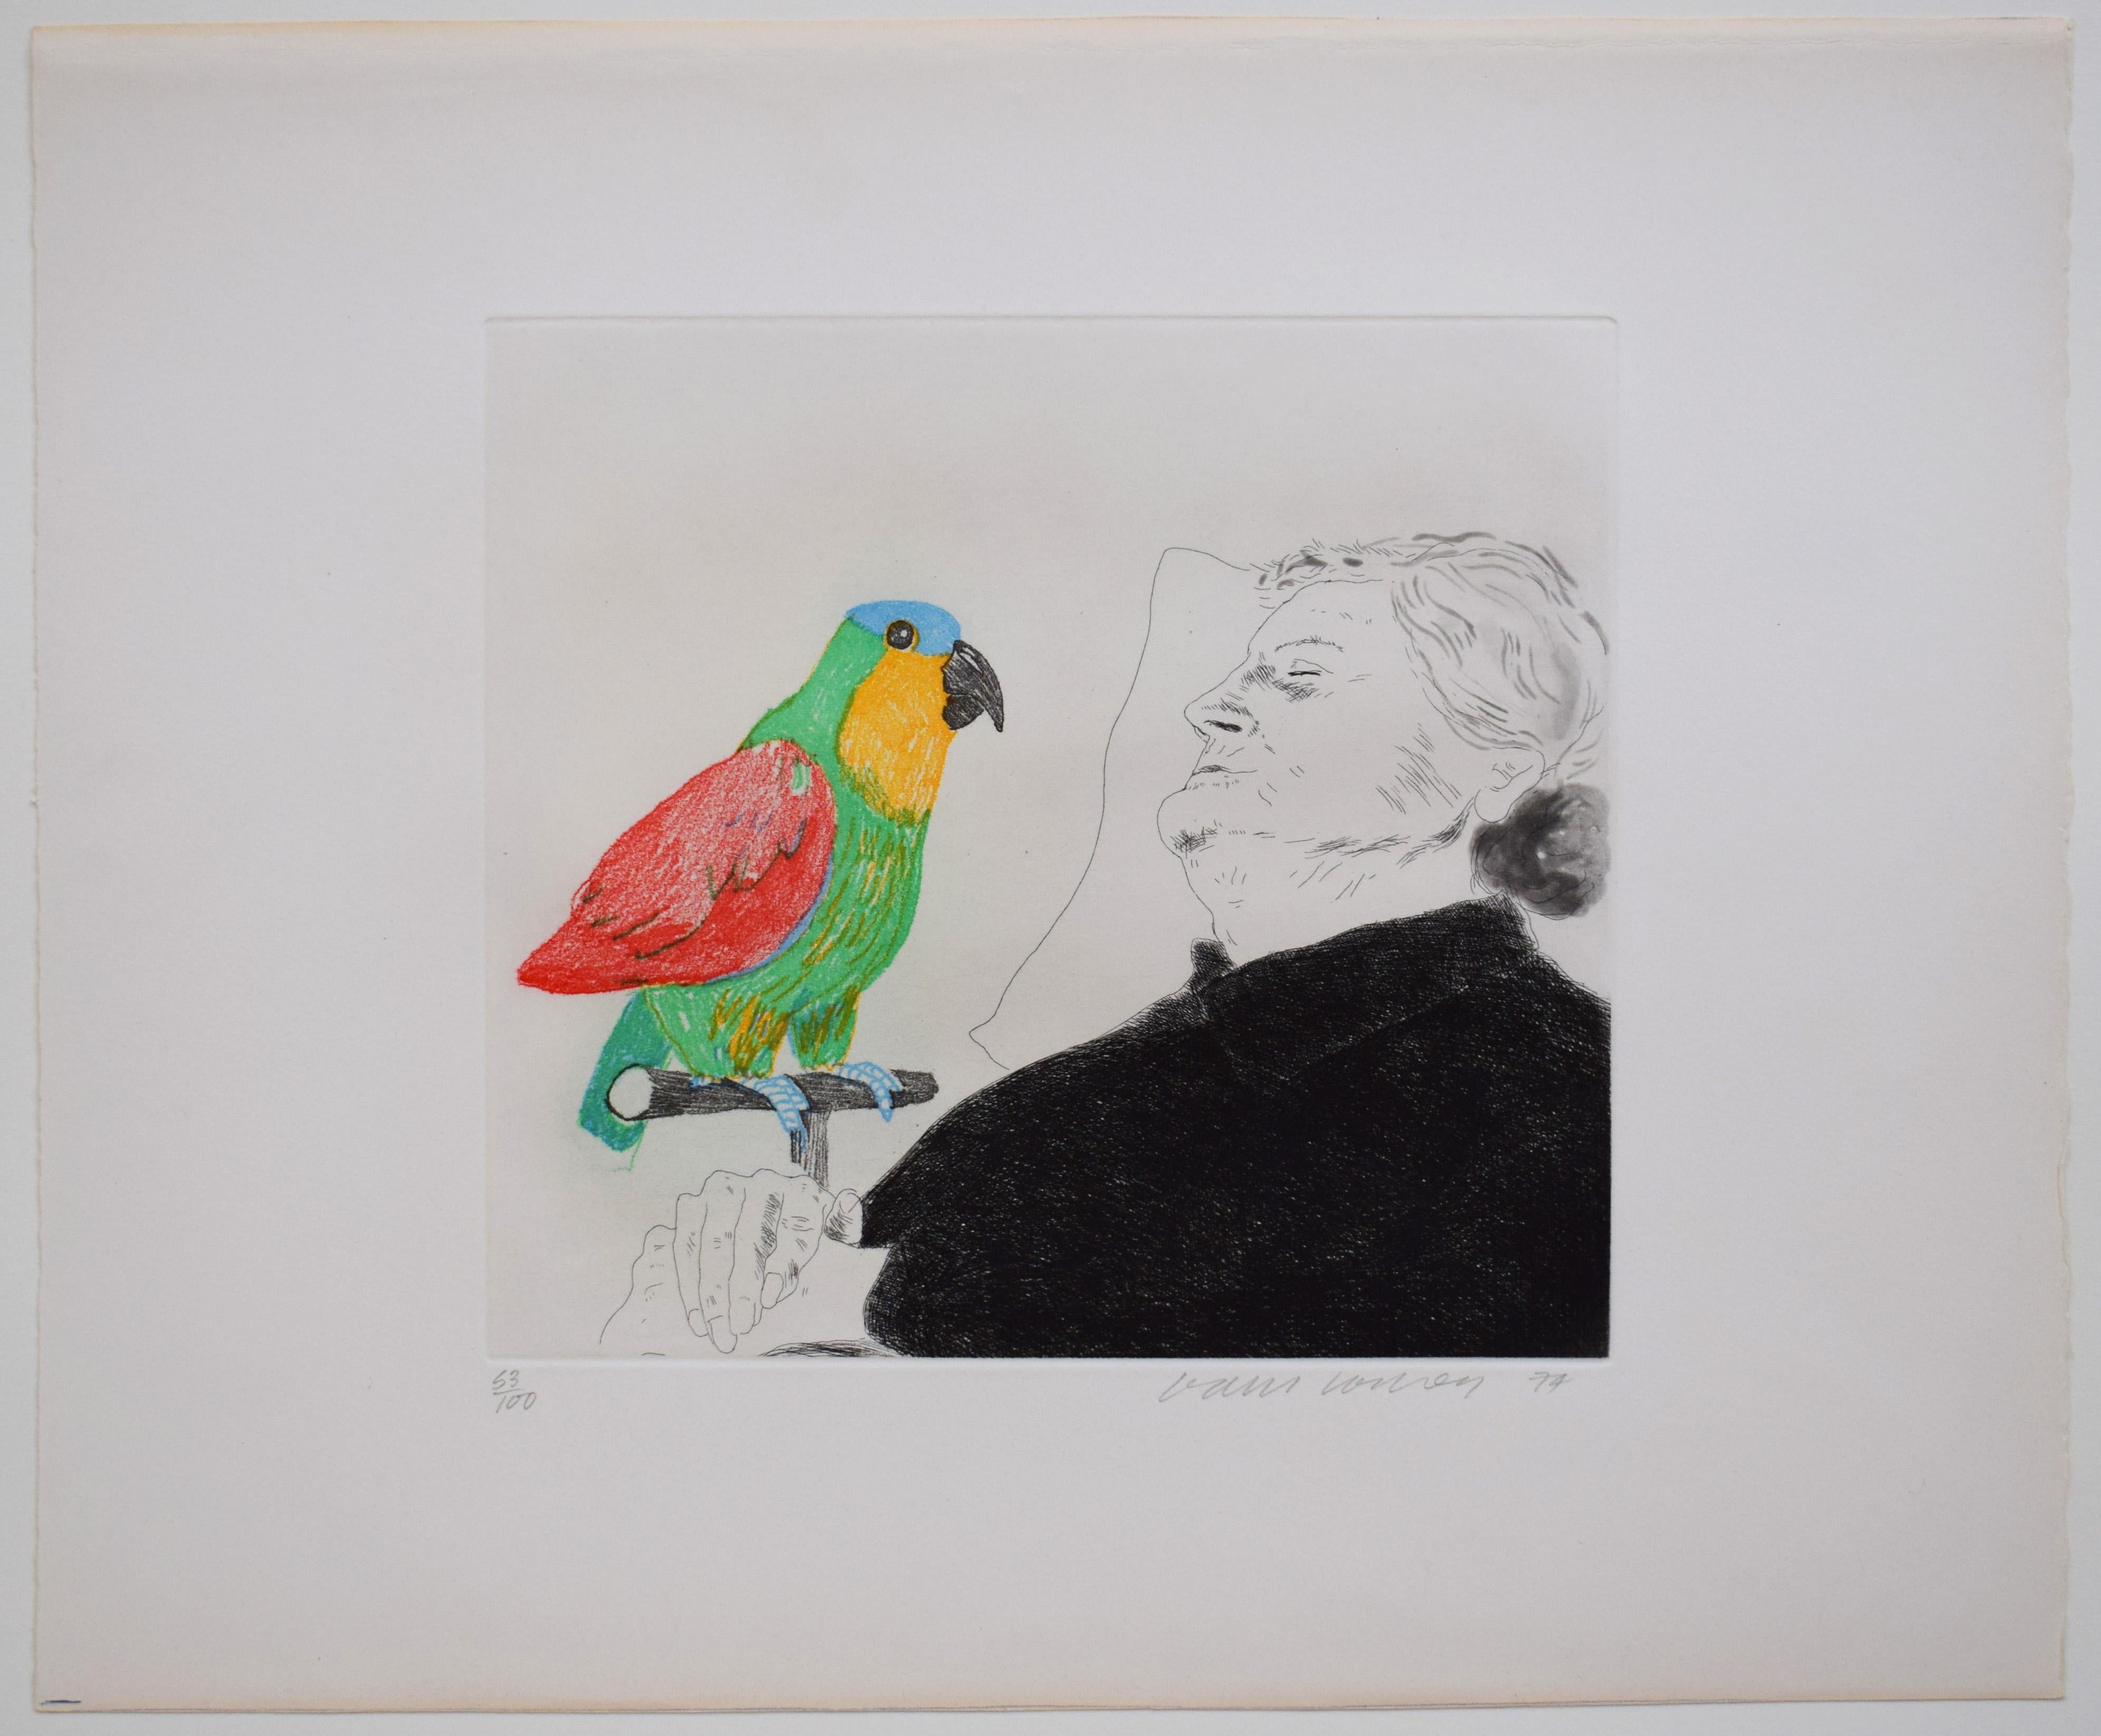 Félicité Sleeping with Parrot, from: Illustration for a Simple Heart of Gustave - Print by David Hockney